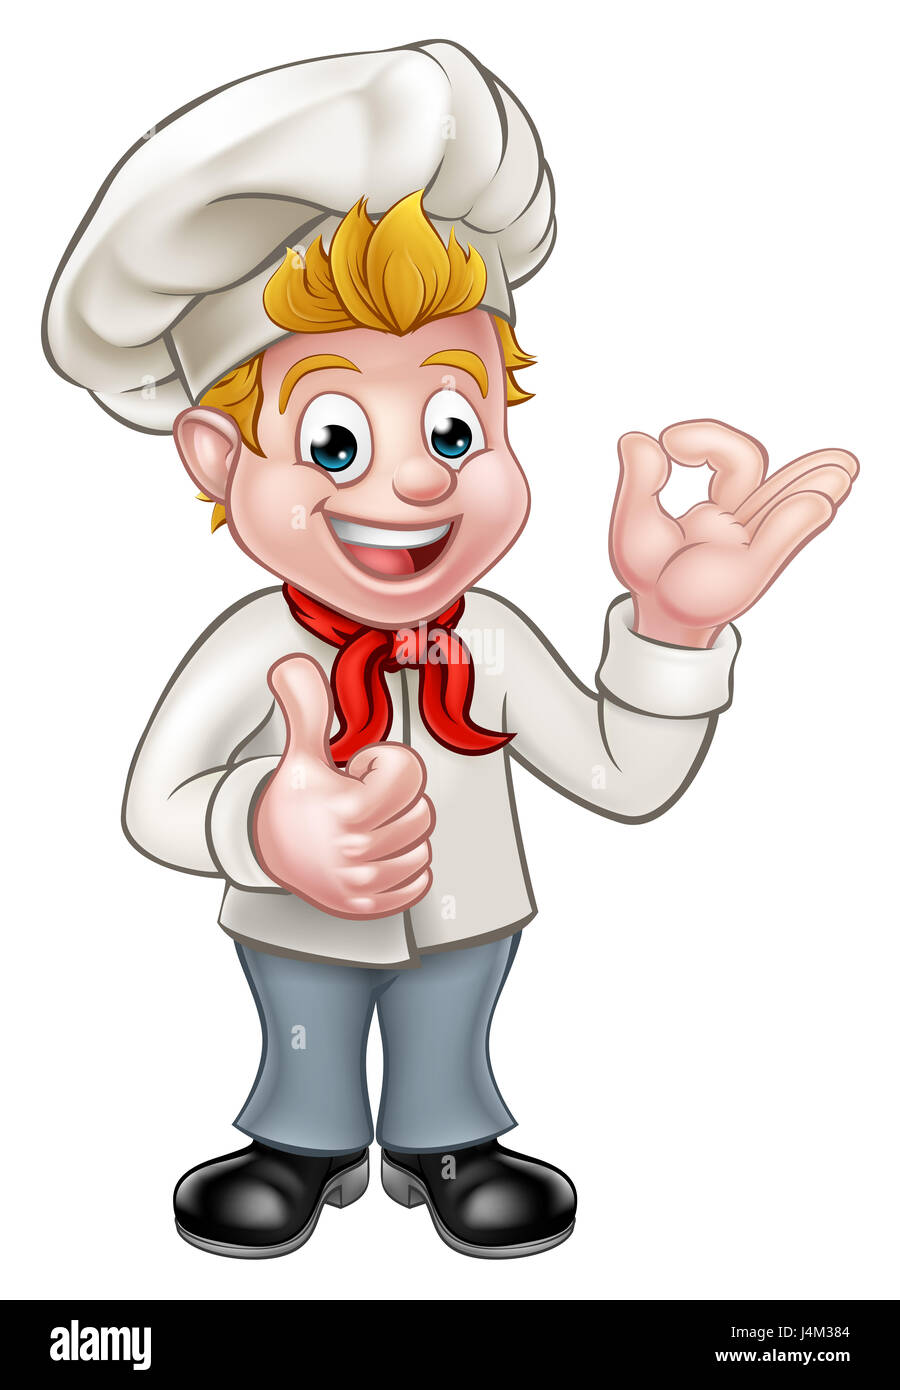 Cartoon chef or baker character giving thumbs up and perfect delicious gesture Stock Photo